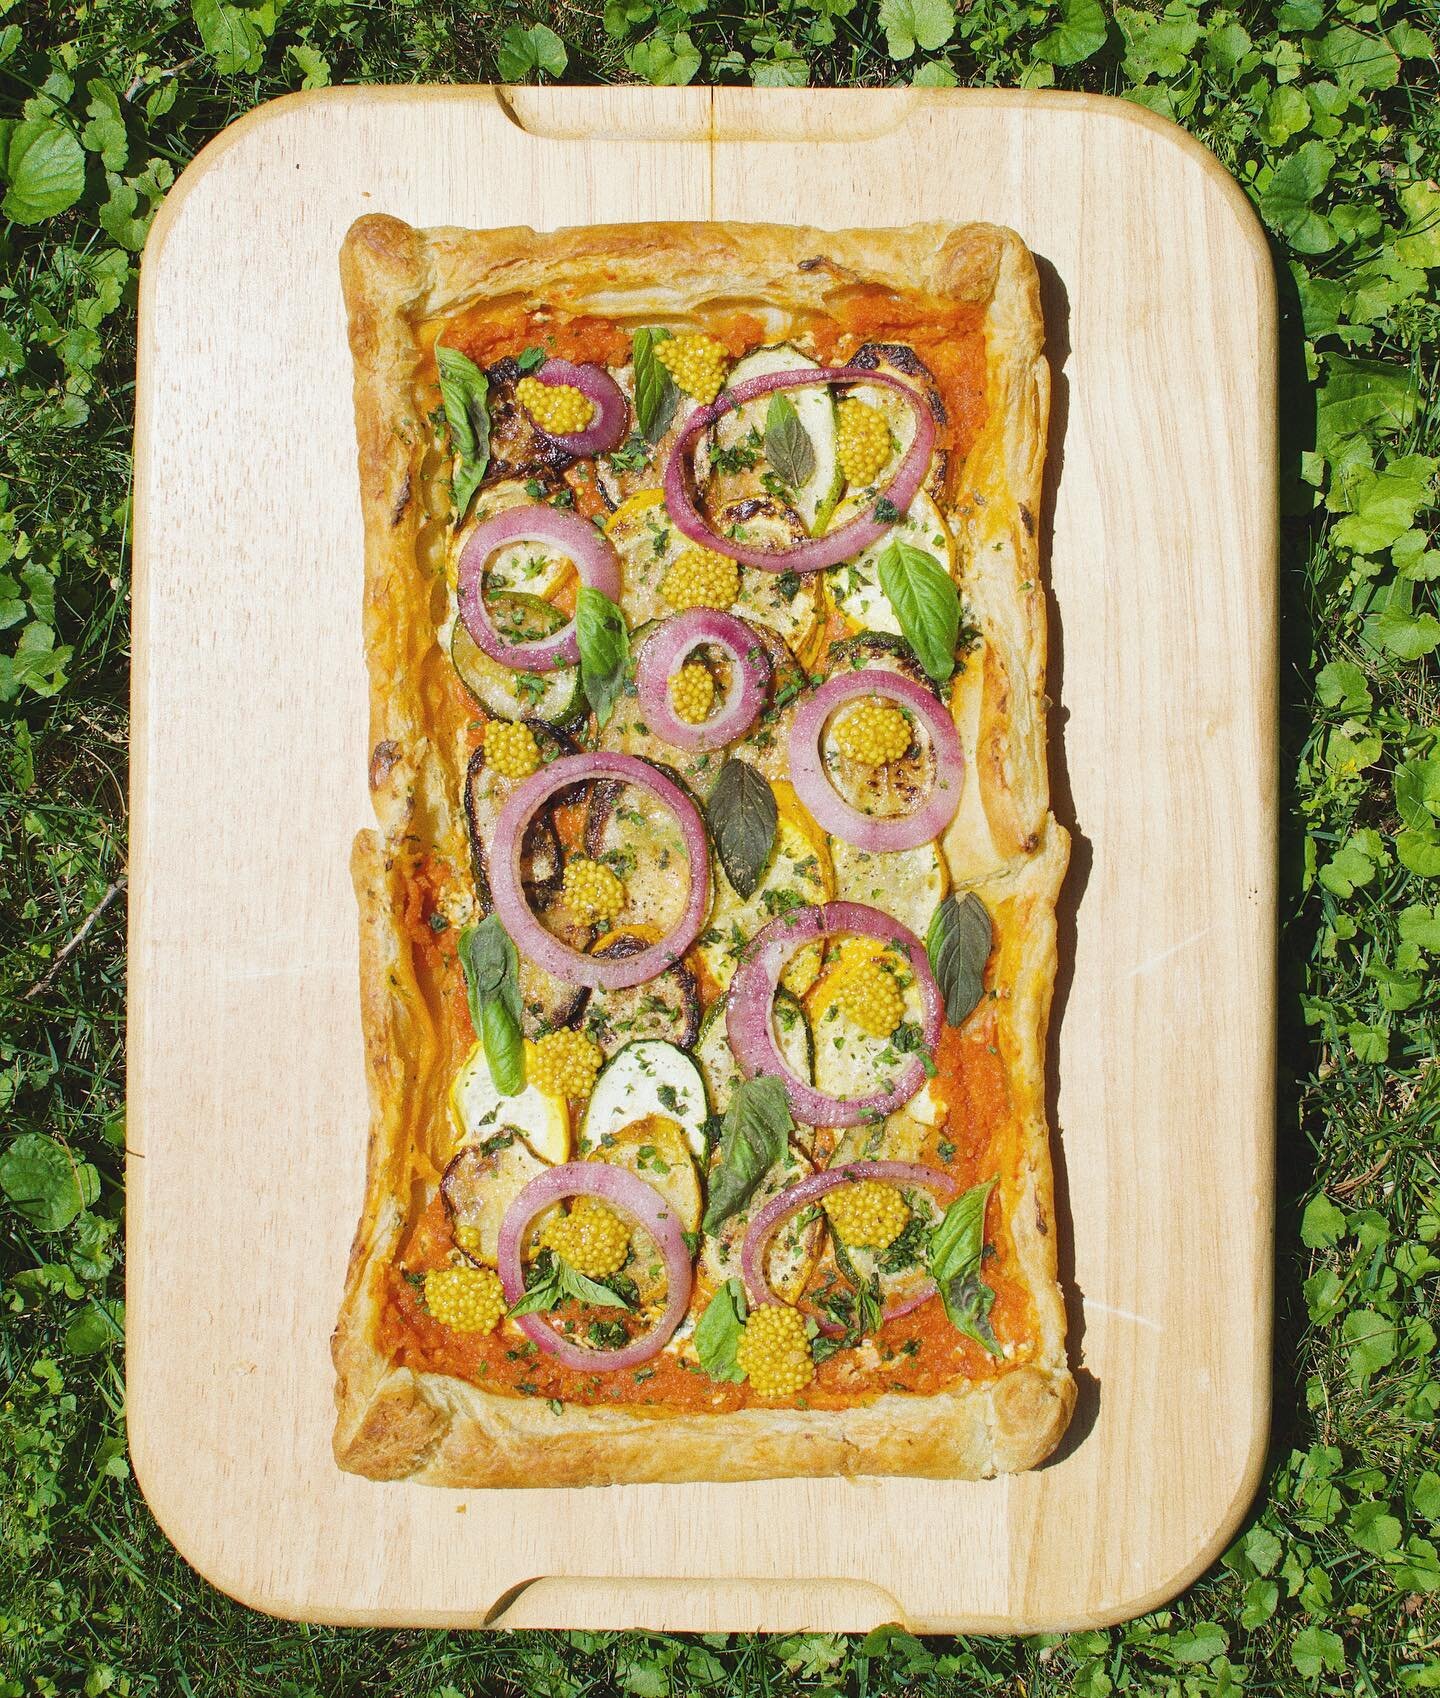 puff pastry, herby cream cheese, fermented tomato pulp, zucchini, red onion, fermented mustard. SUMMER!!!!!